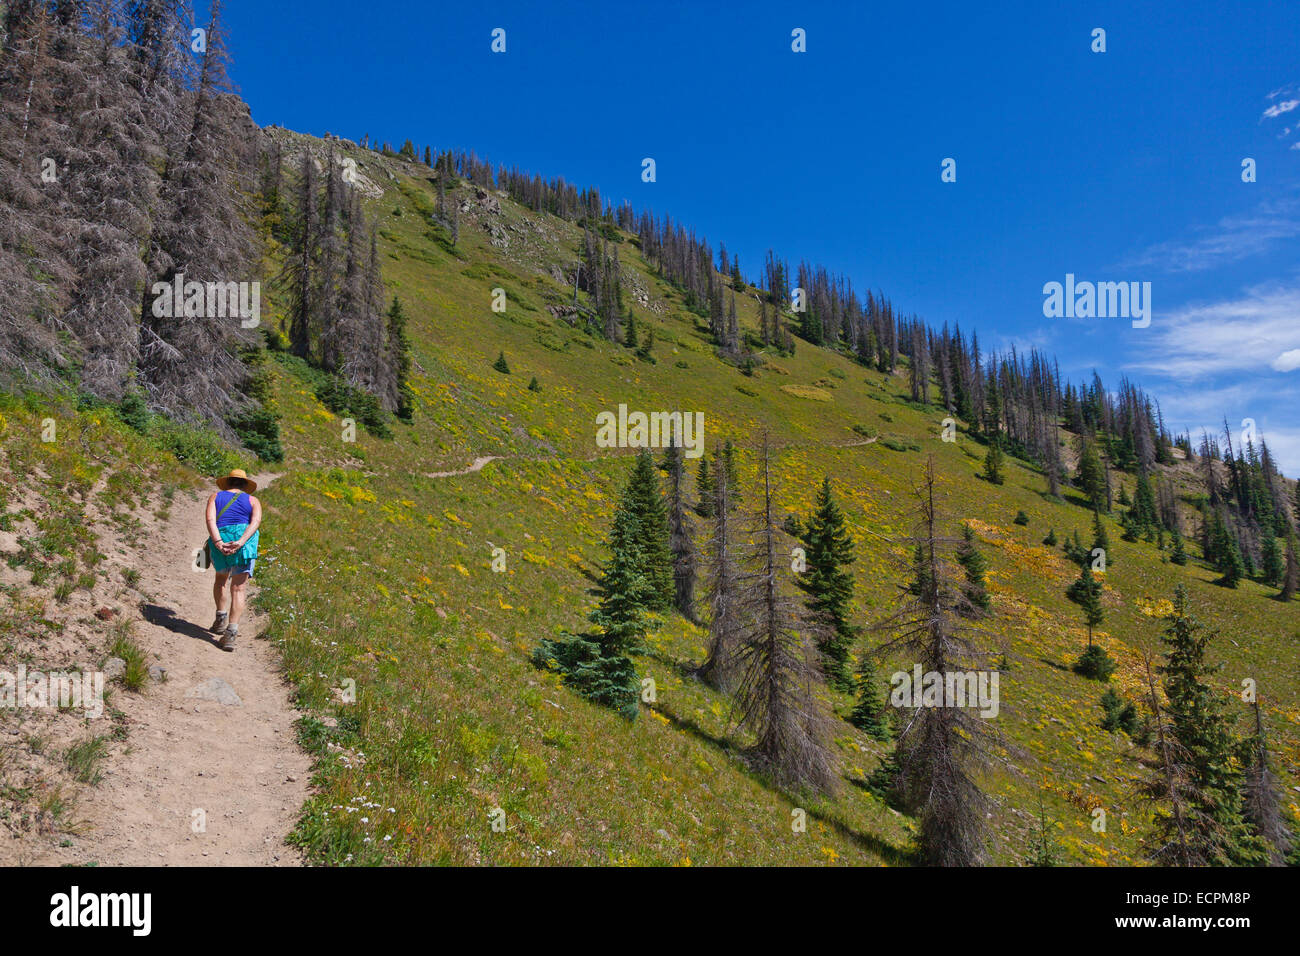 A HIKER walking near LOBO POINT, elevation 7060 feet,  on the Continental Divide - SOUTHERN COLORADO MR Stock Photo